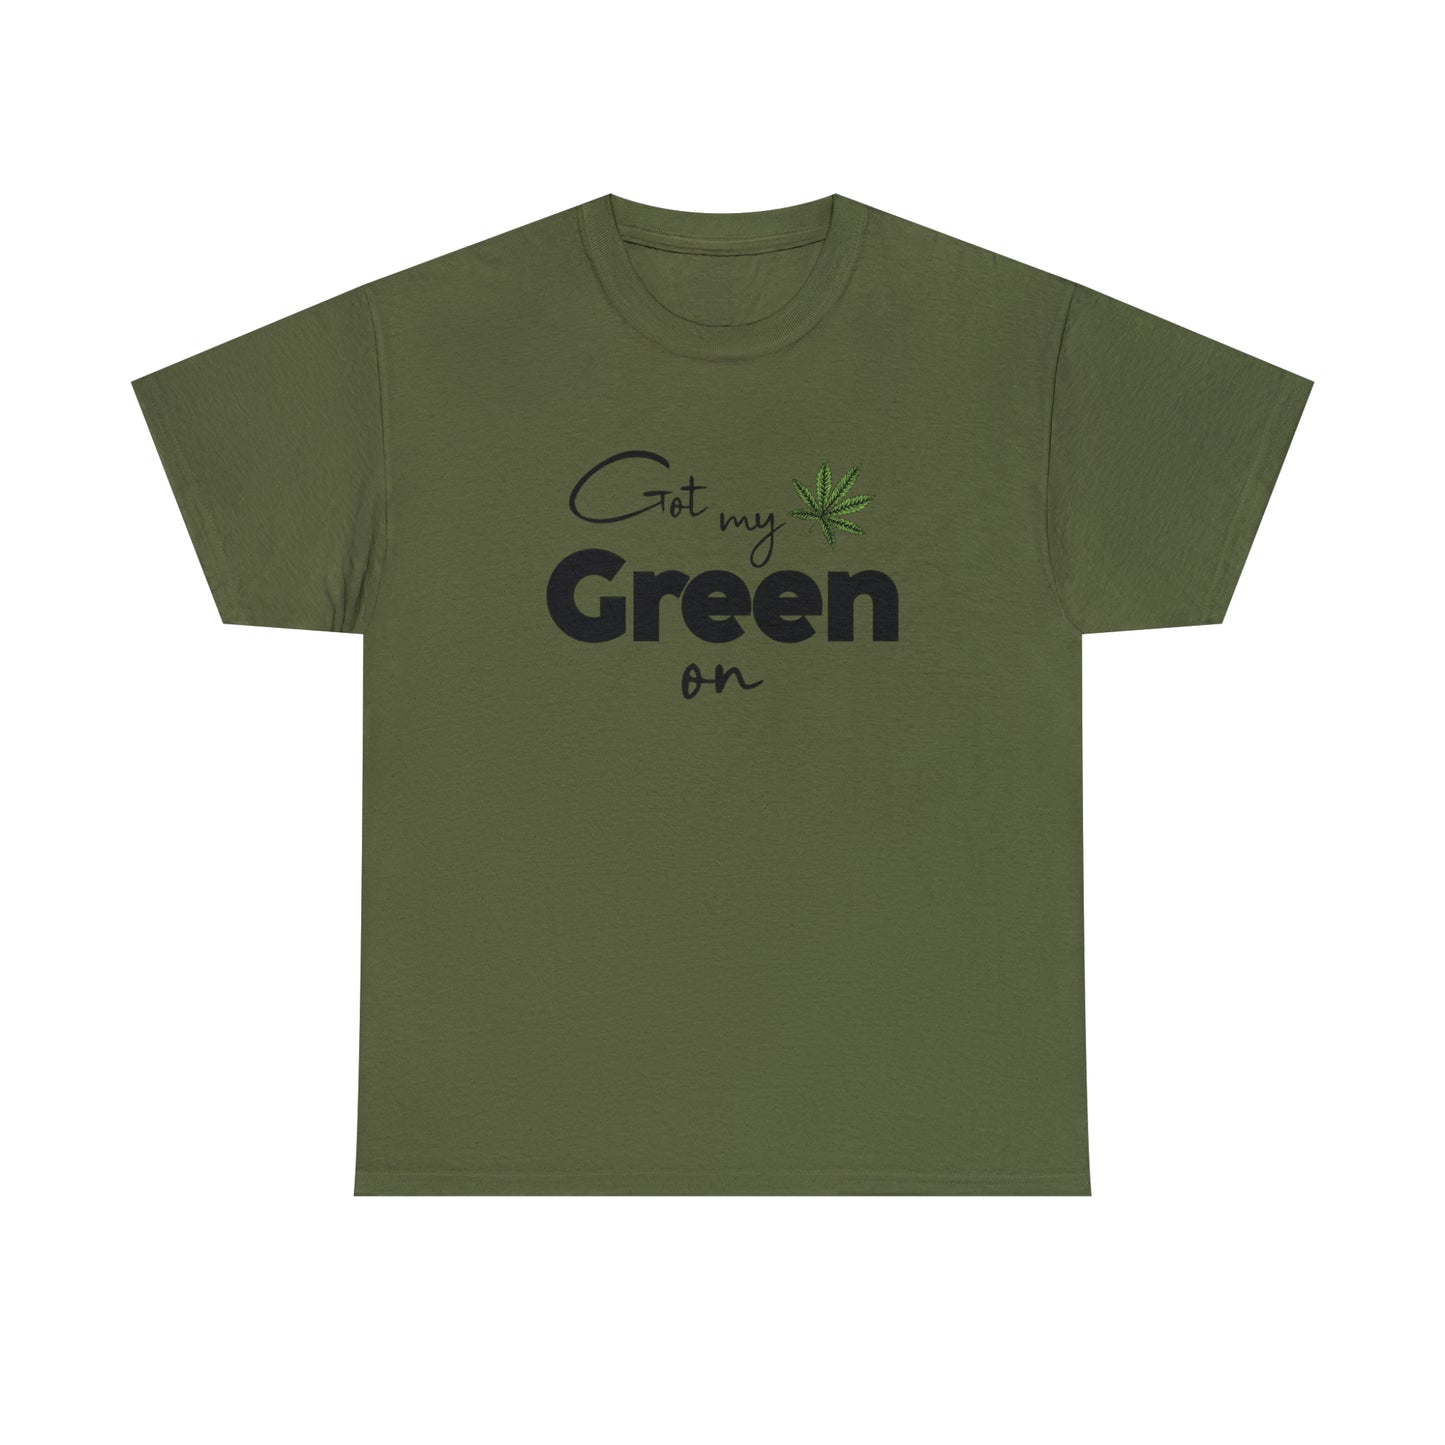 "Got My Green On" T-Shirt - Weave Got Gifts - Unique Gifts You Won’t Find Anywhere Else!